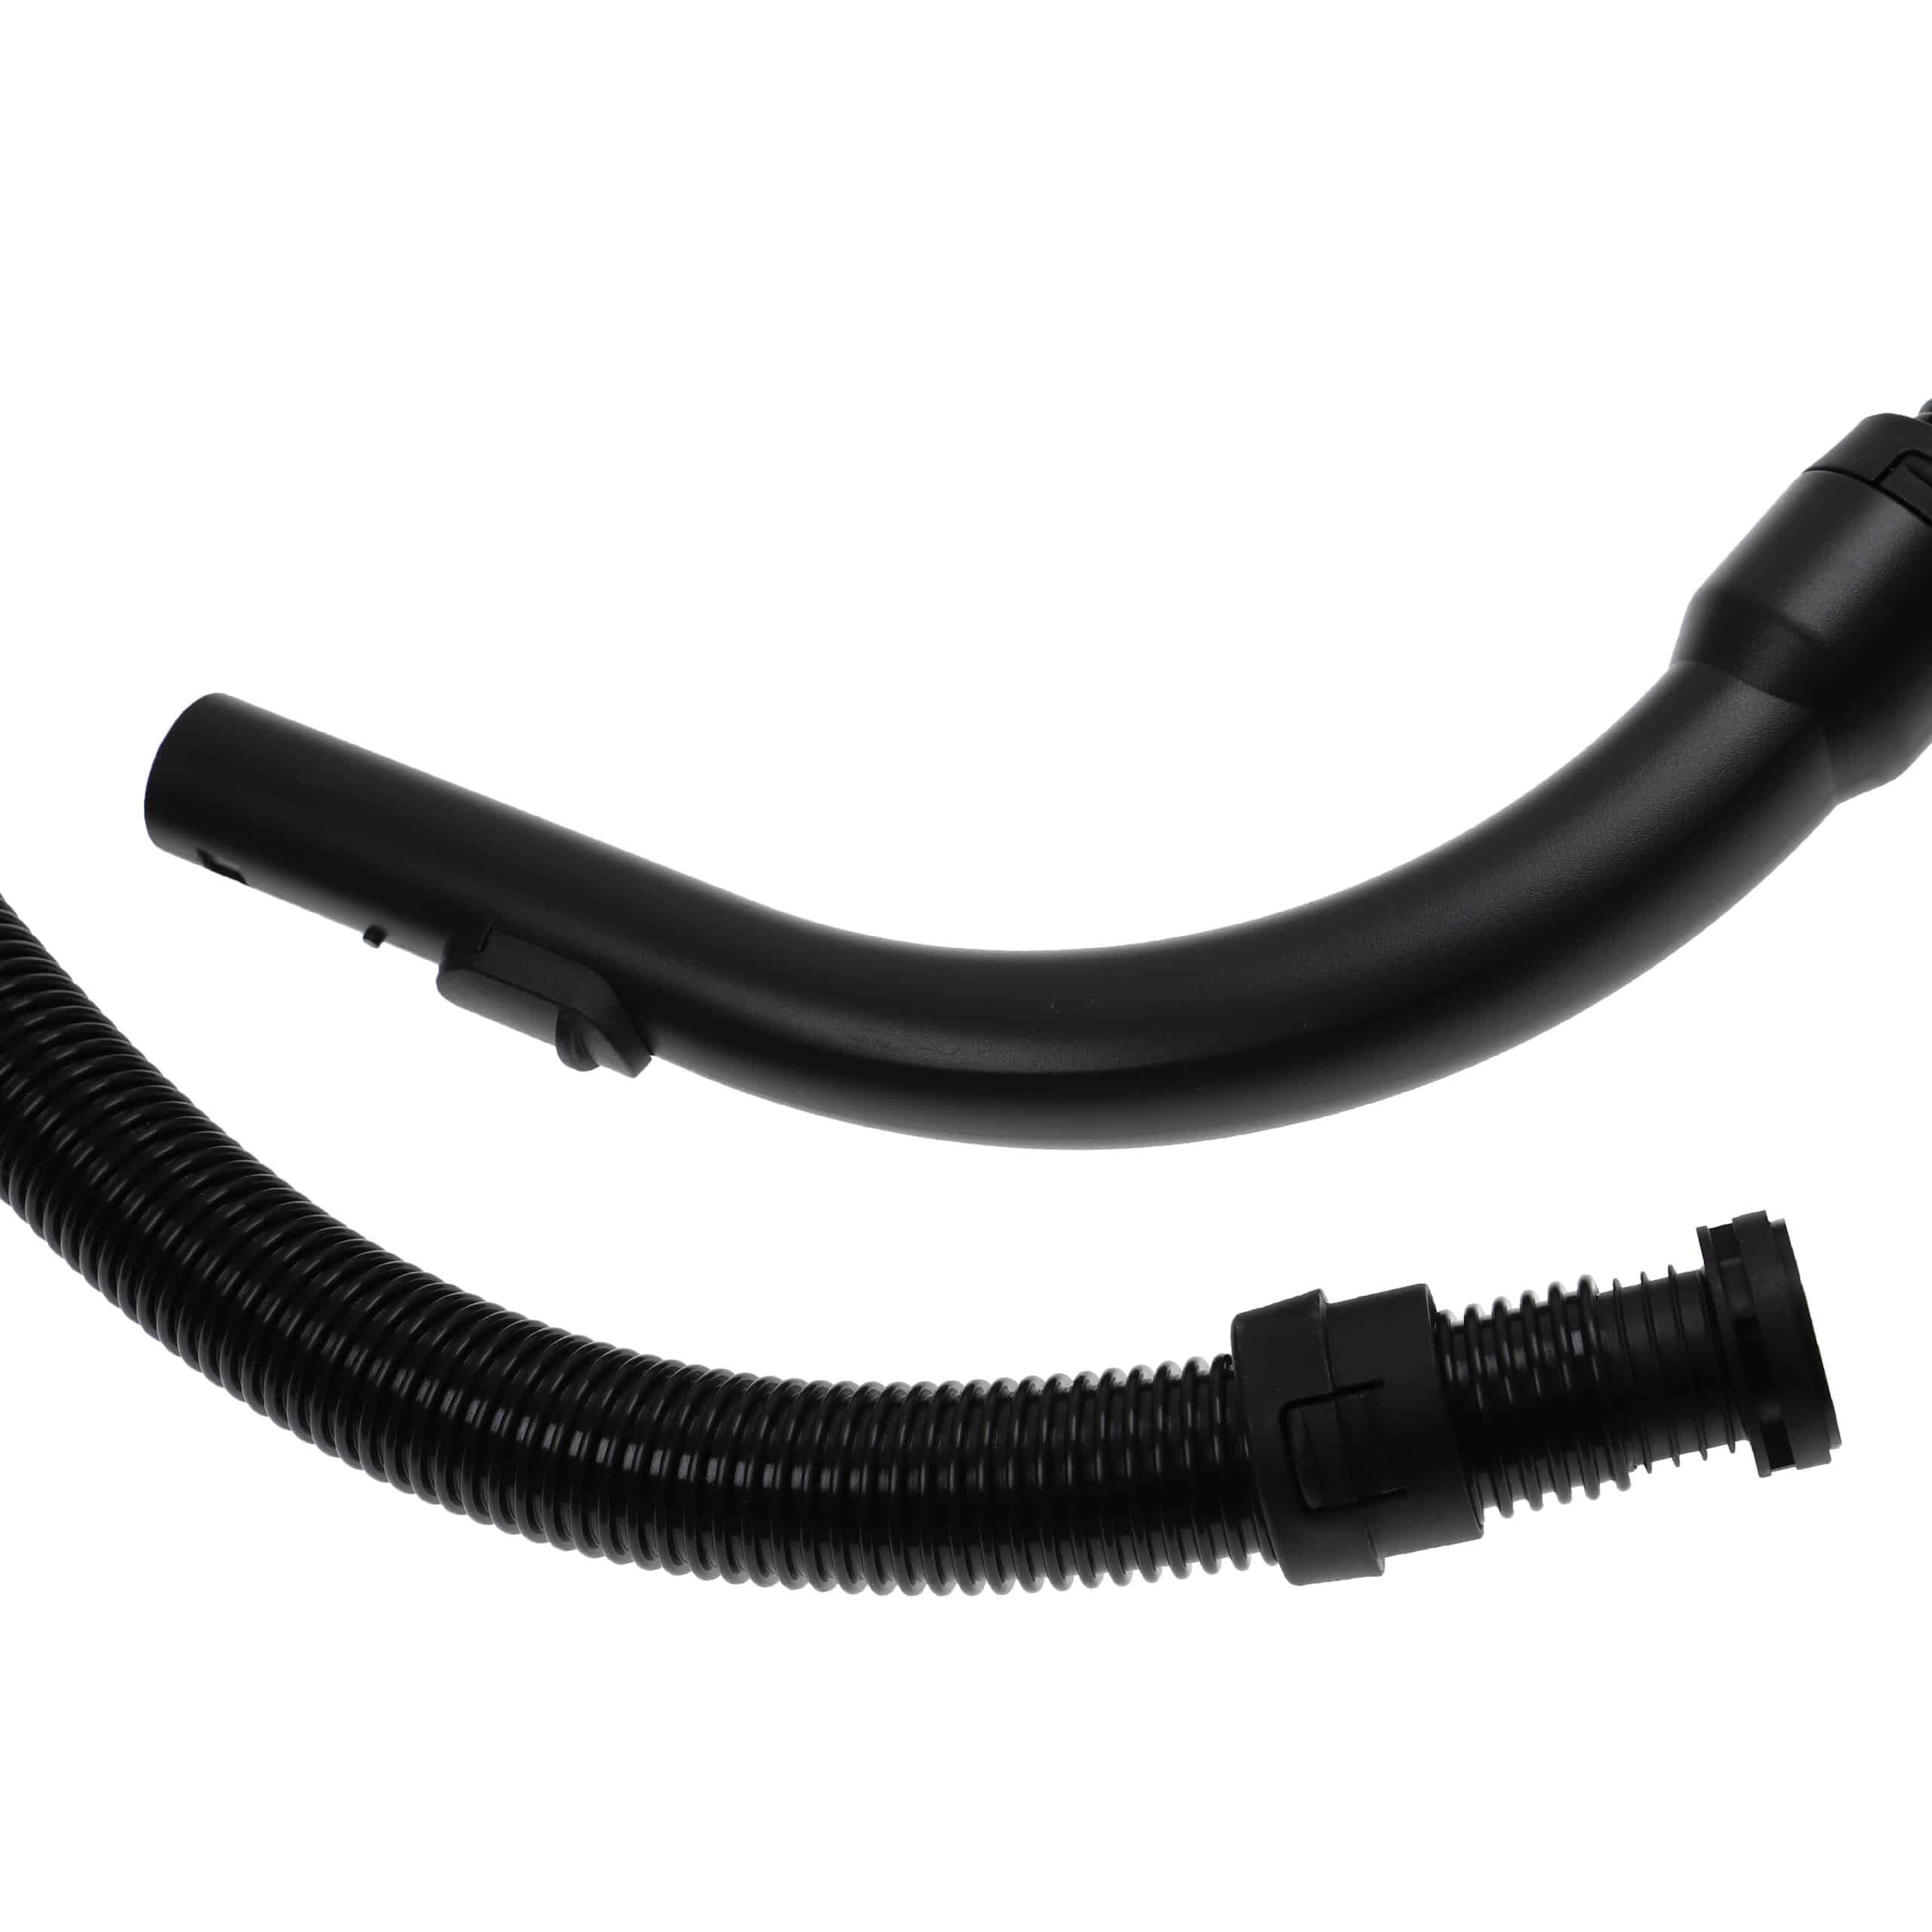 Hose suitable for Miele Complete C3 etc. - with Handle, 1.8 m long